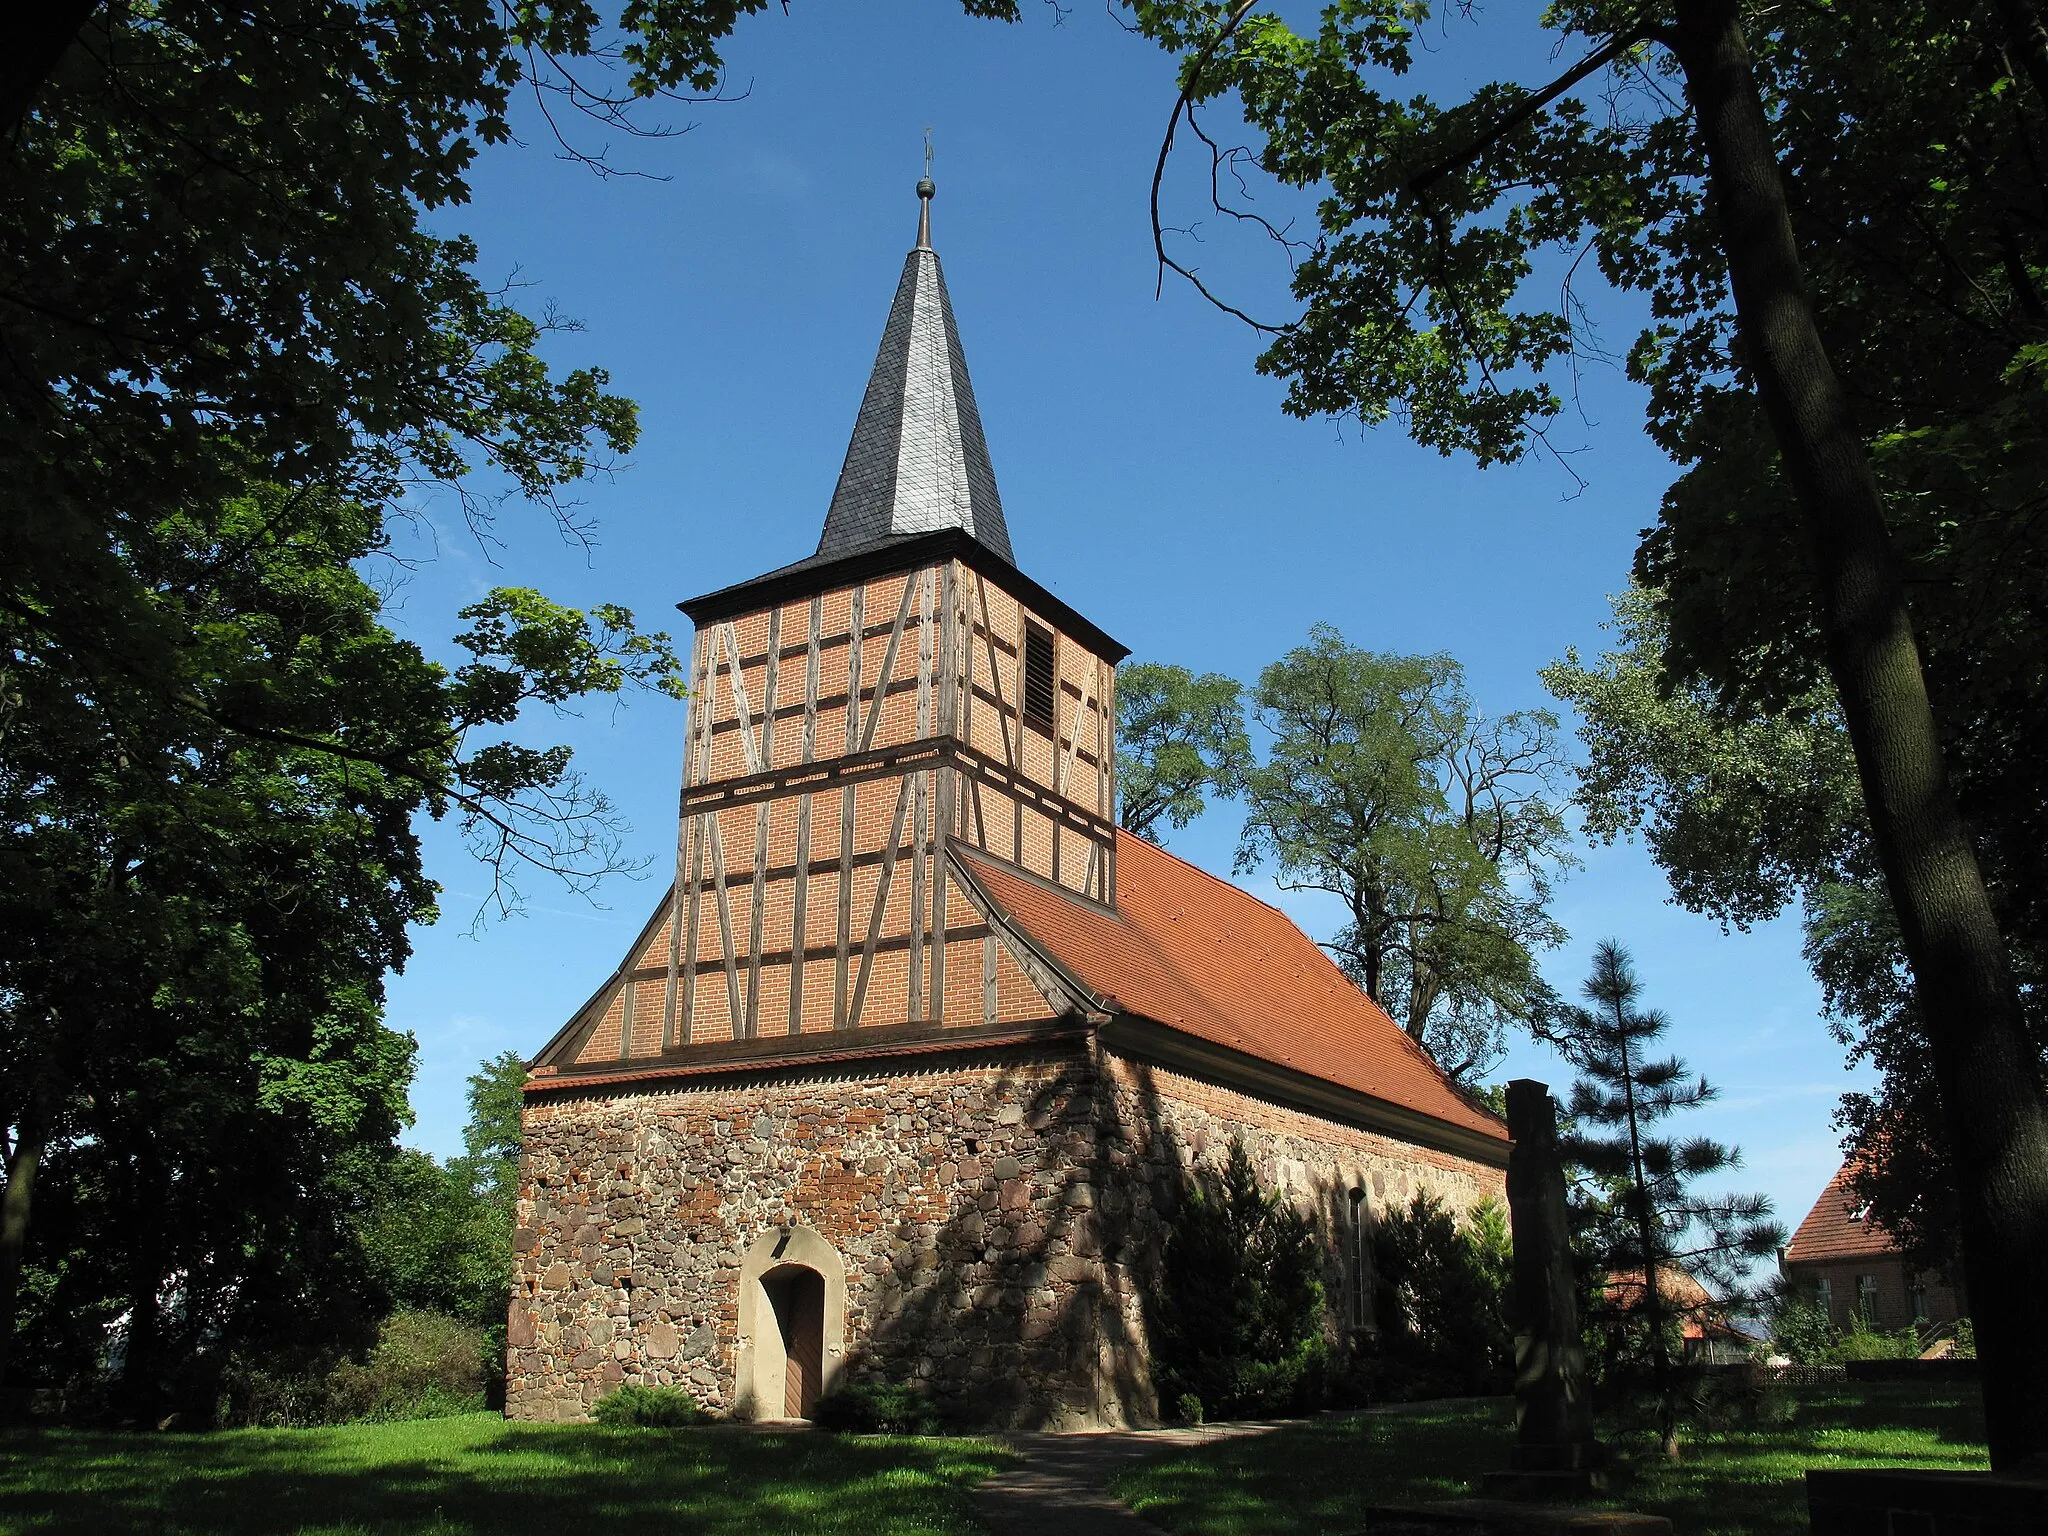 Photo showing: Village church Merz. Listed and restored late Gothic art Fieldstone church. Merz is a part of the municipality Ragow-Merz in the District Oder-Spree, Brandenburg, Germany.